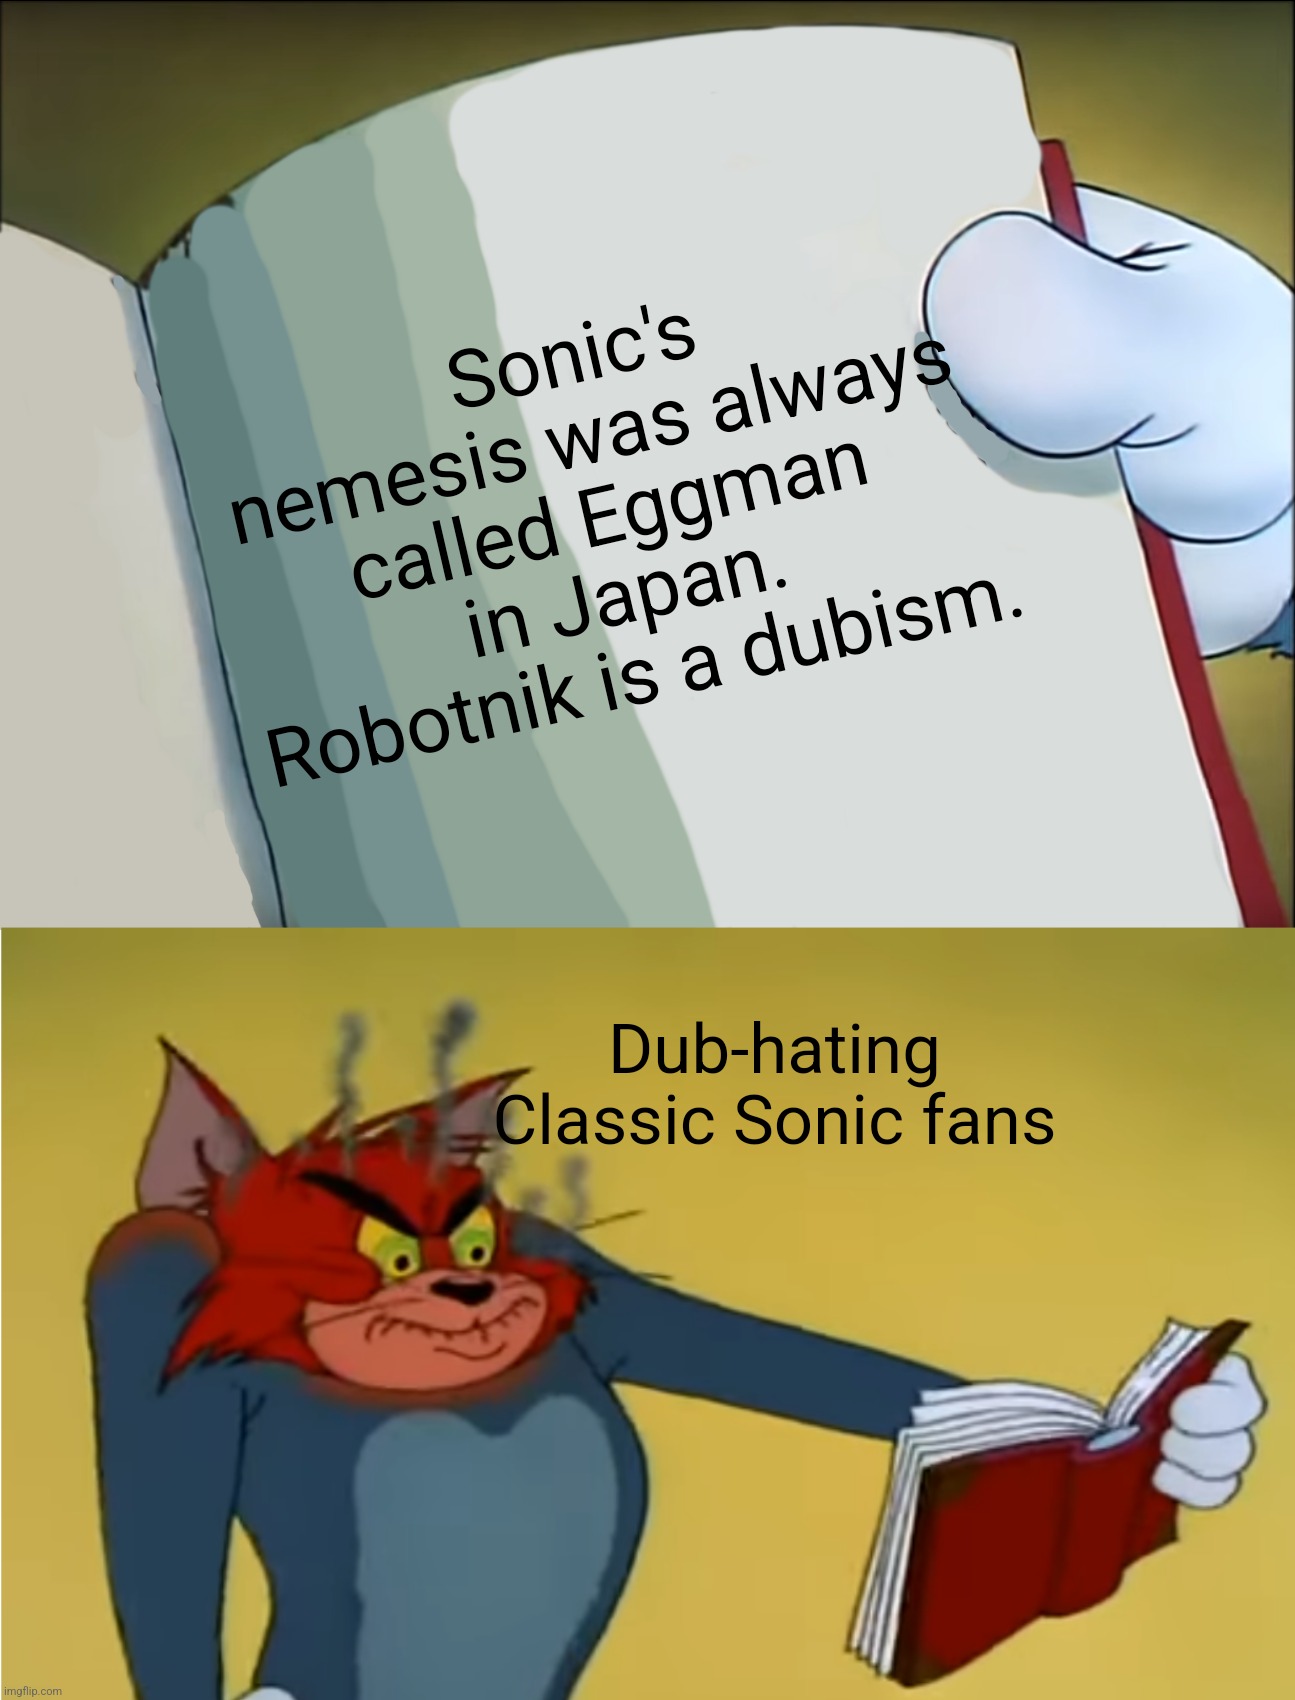 Angry Tom Reading Book | Sonic's nemesis was always called Eggman in Japan. Robotnik is a dubism. Dub-hating Classic Sonic fans | image tagged in angry tom reading book | made w/ Imgflip meme maker